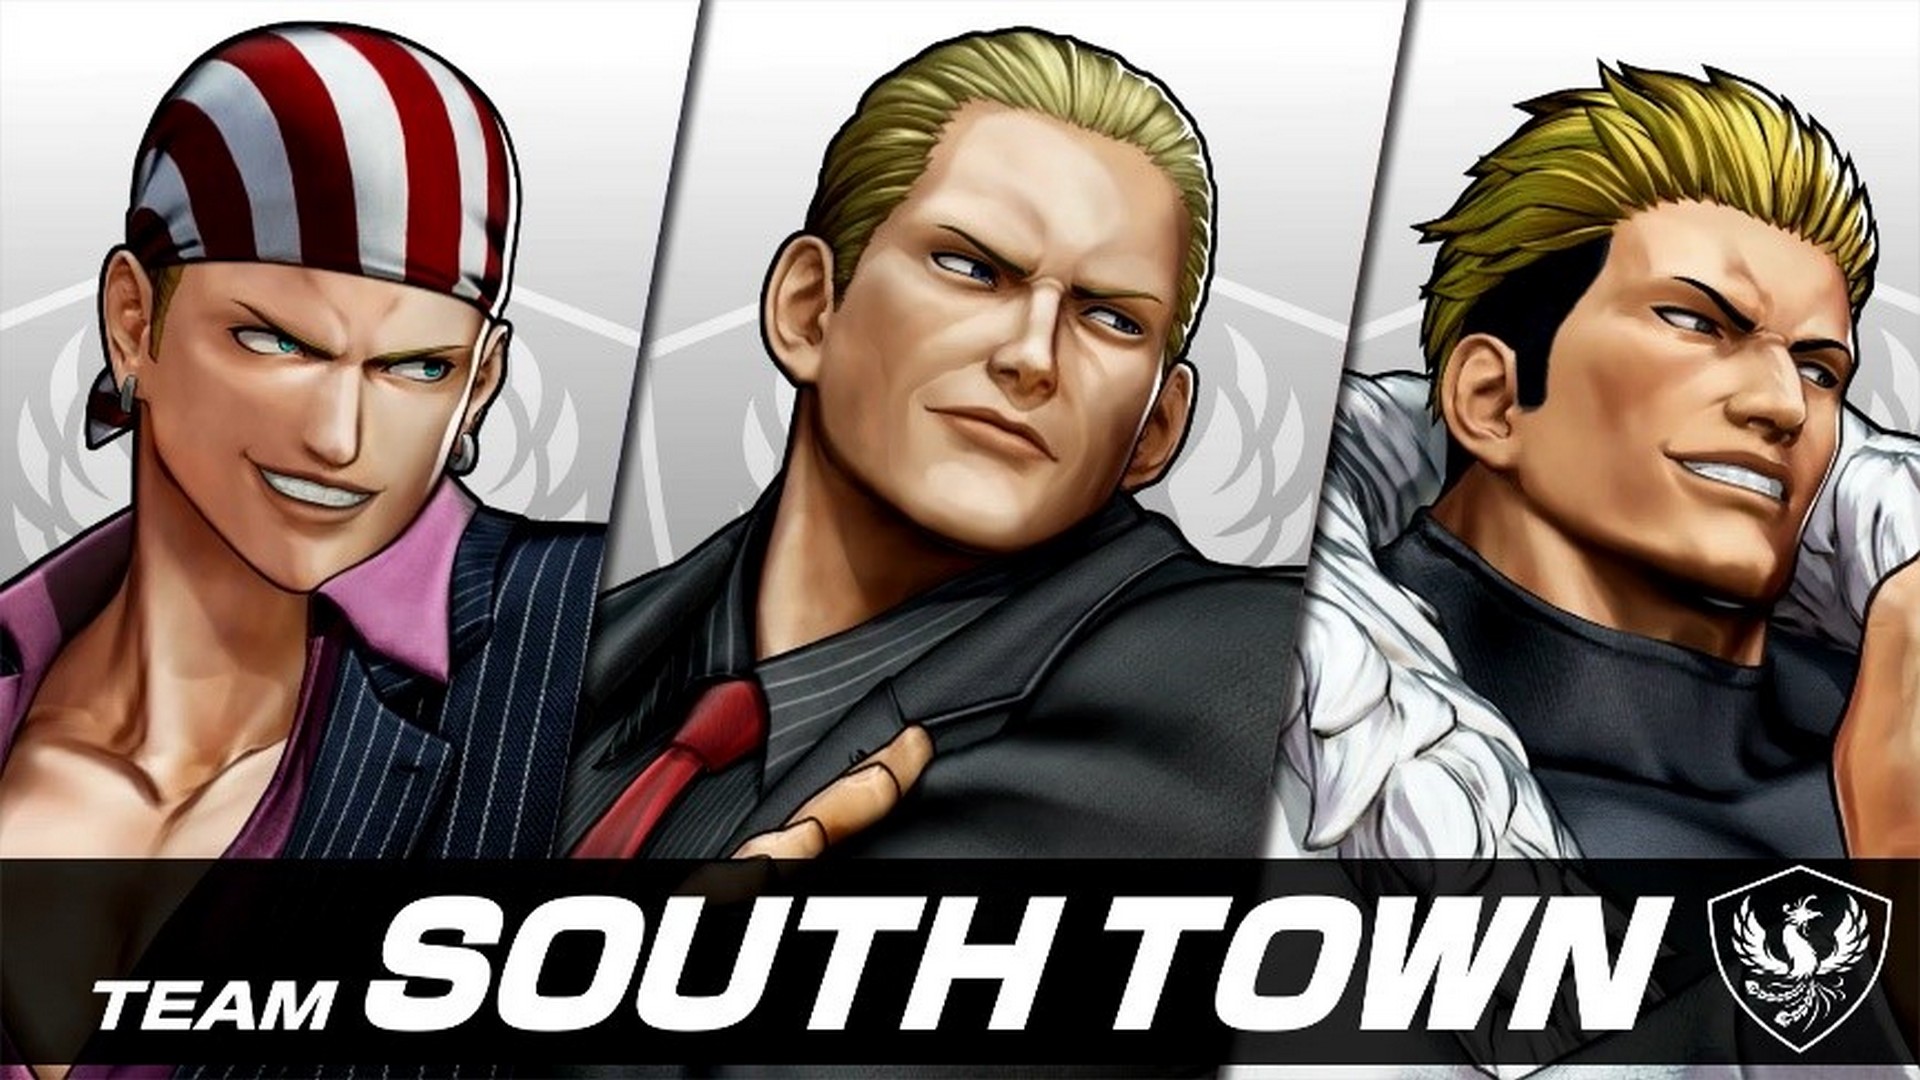 Team South Town From Fatal Fury Joins The King Of Fighters XV Roster On May 17th